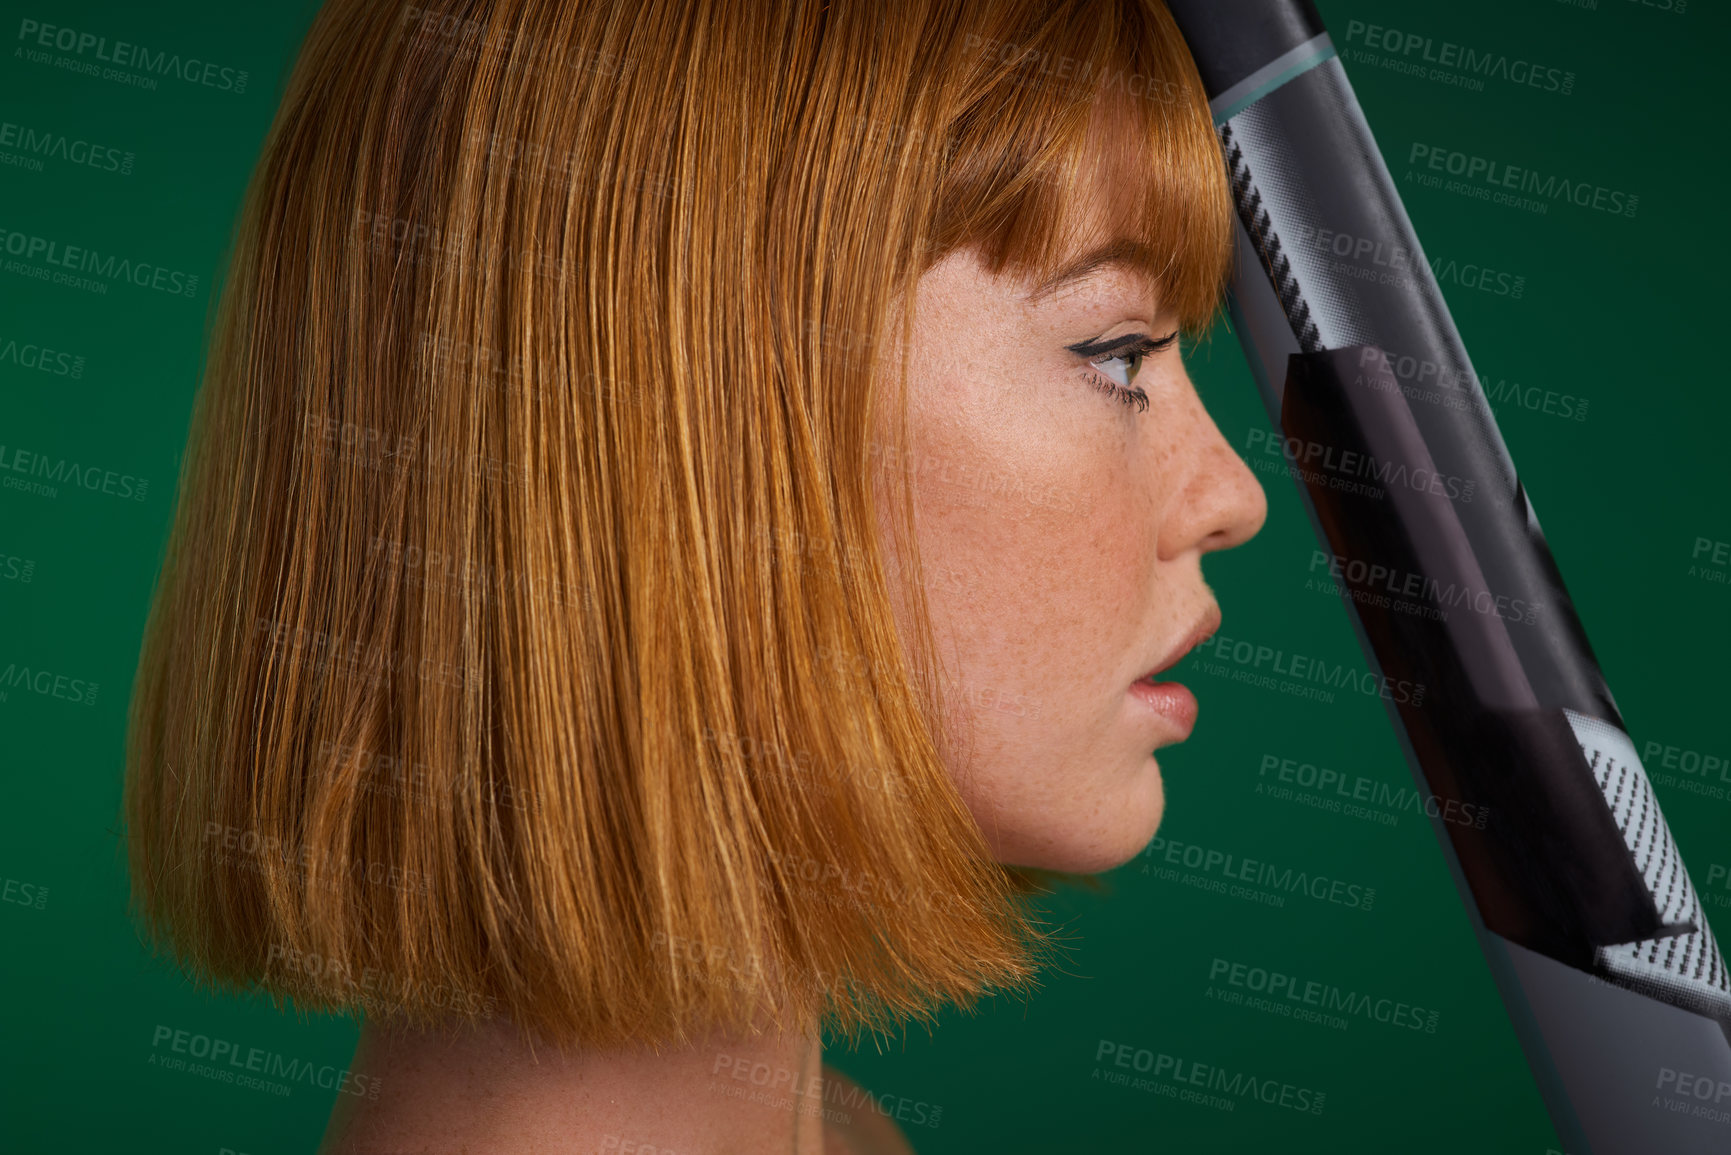 Buy stock photo Cropped shot of an attractive young sportswoman standing alone and posing with hockey stick against a green studio background